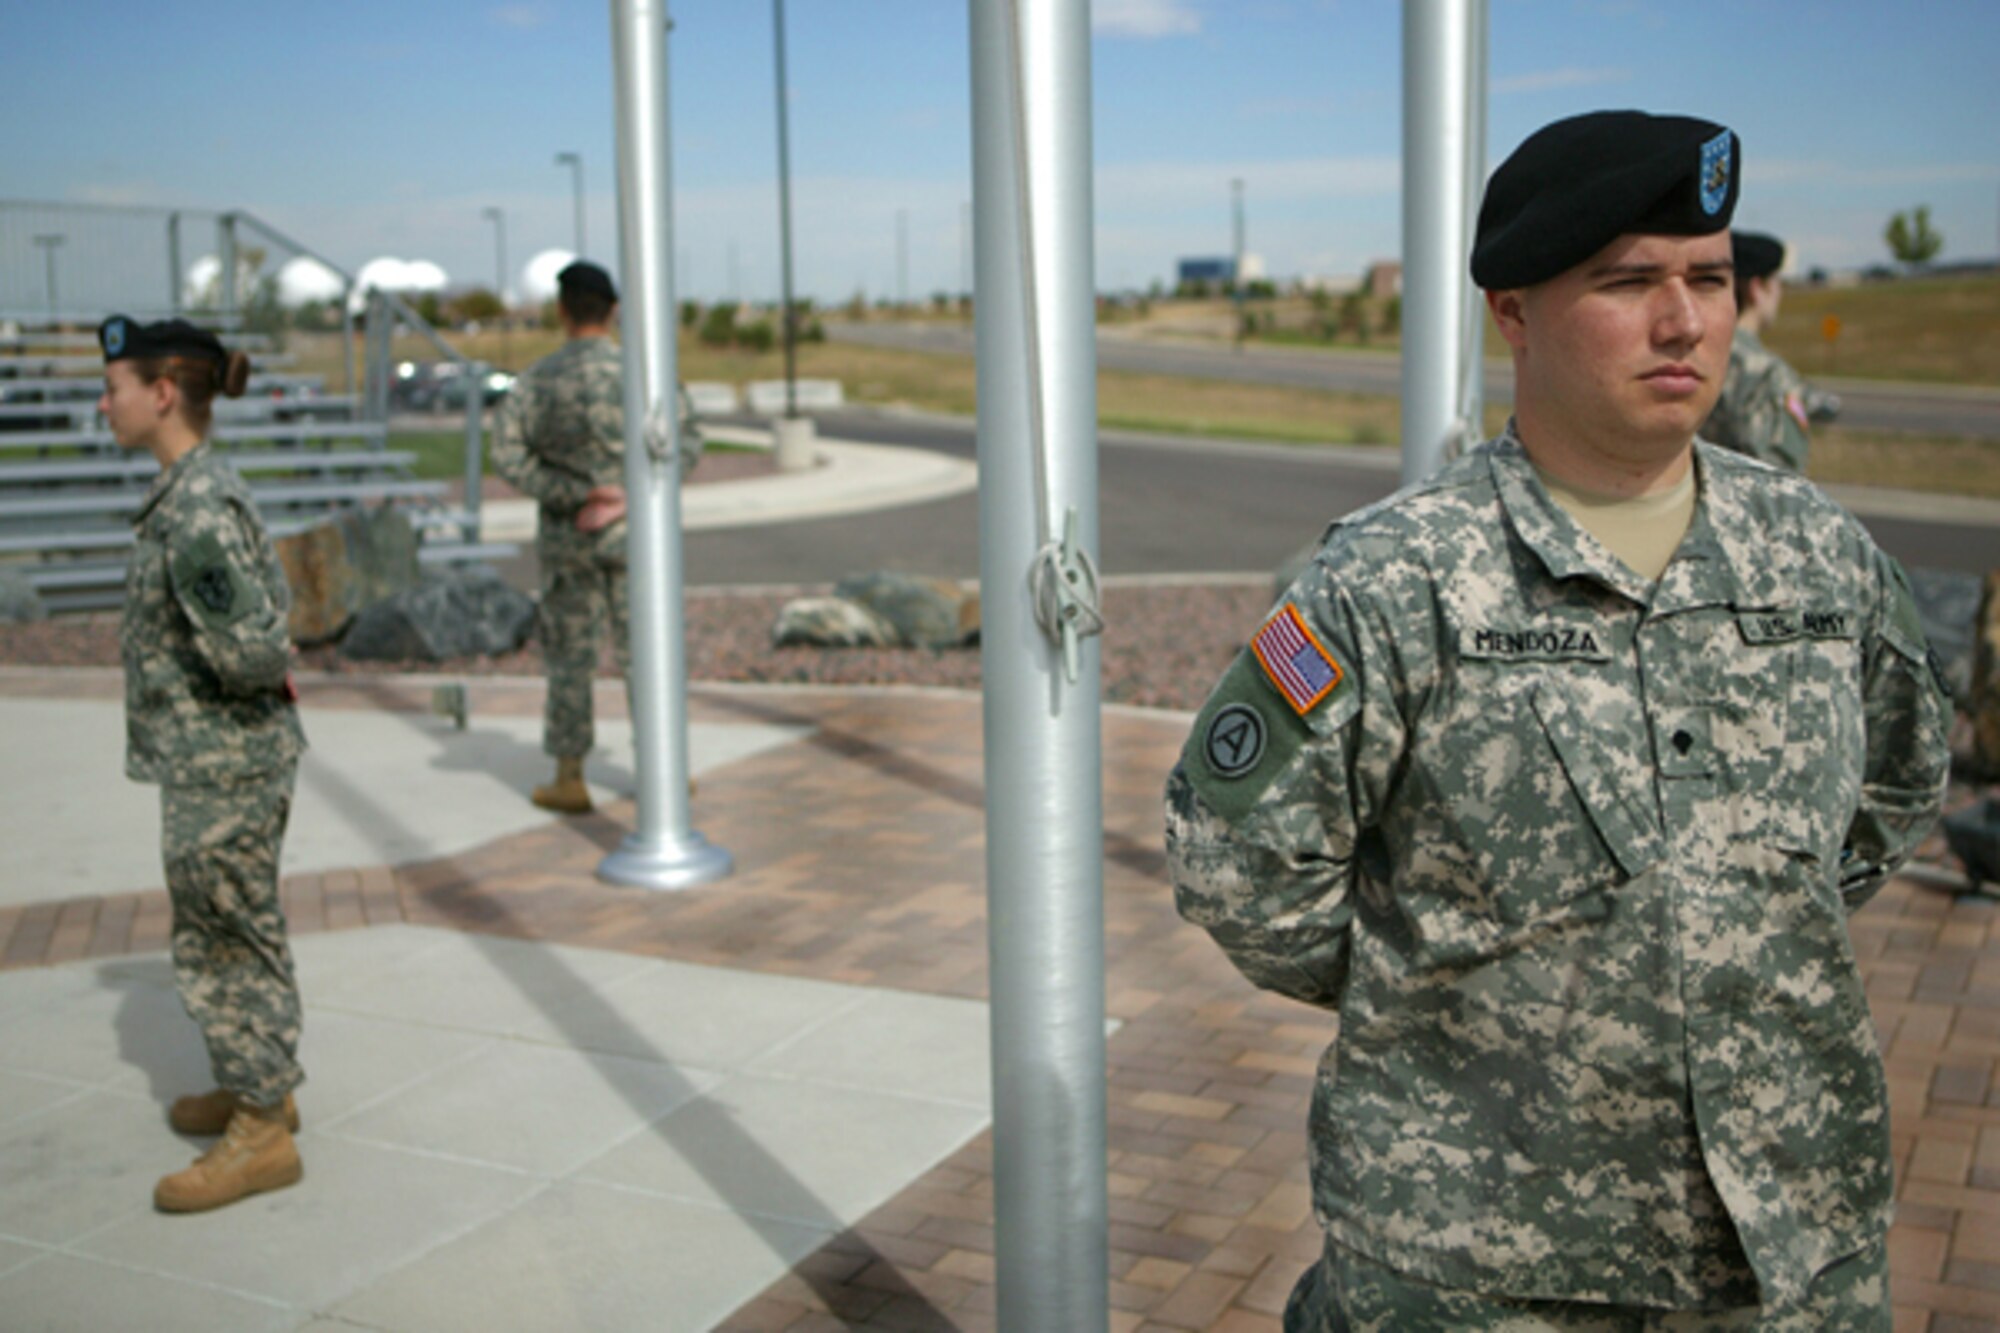 BUCKLEY AIR FORCE BASE, Colo. -- Army Spc. Matthew Mendoza and three other Soldiers stand watch during a POW-MIA vigil in front of the 460th Space Wing headquarters building Sept. 15. More than 130 Team Buckley members from all services took turns standing vigil in four-person teams for 15 minutes throughout the day to pay tribute on National POW/MIA Recognition Day. All of the Soldiers are from the 743rd Military Intelligence Battalion here. (U.S. Army photo by Sgt. 1st Class Christian Vargo)